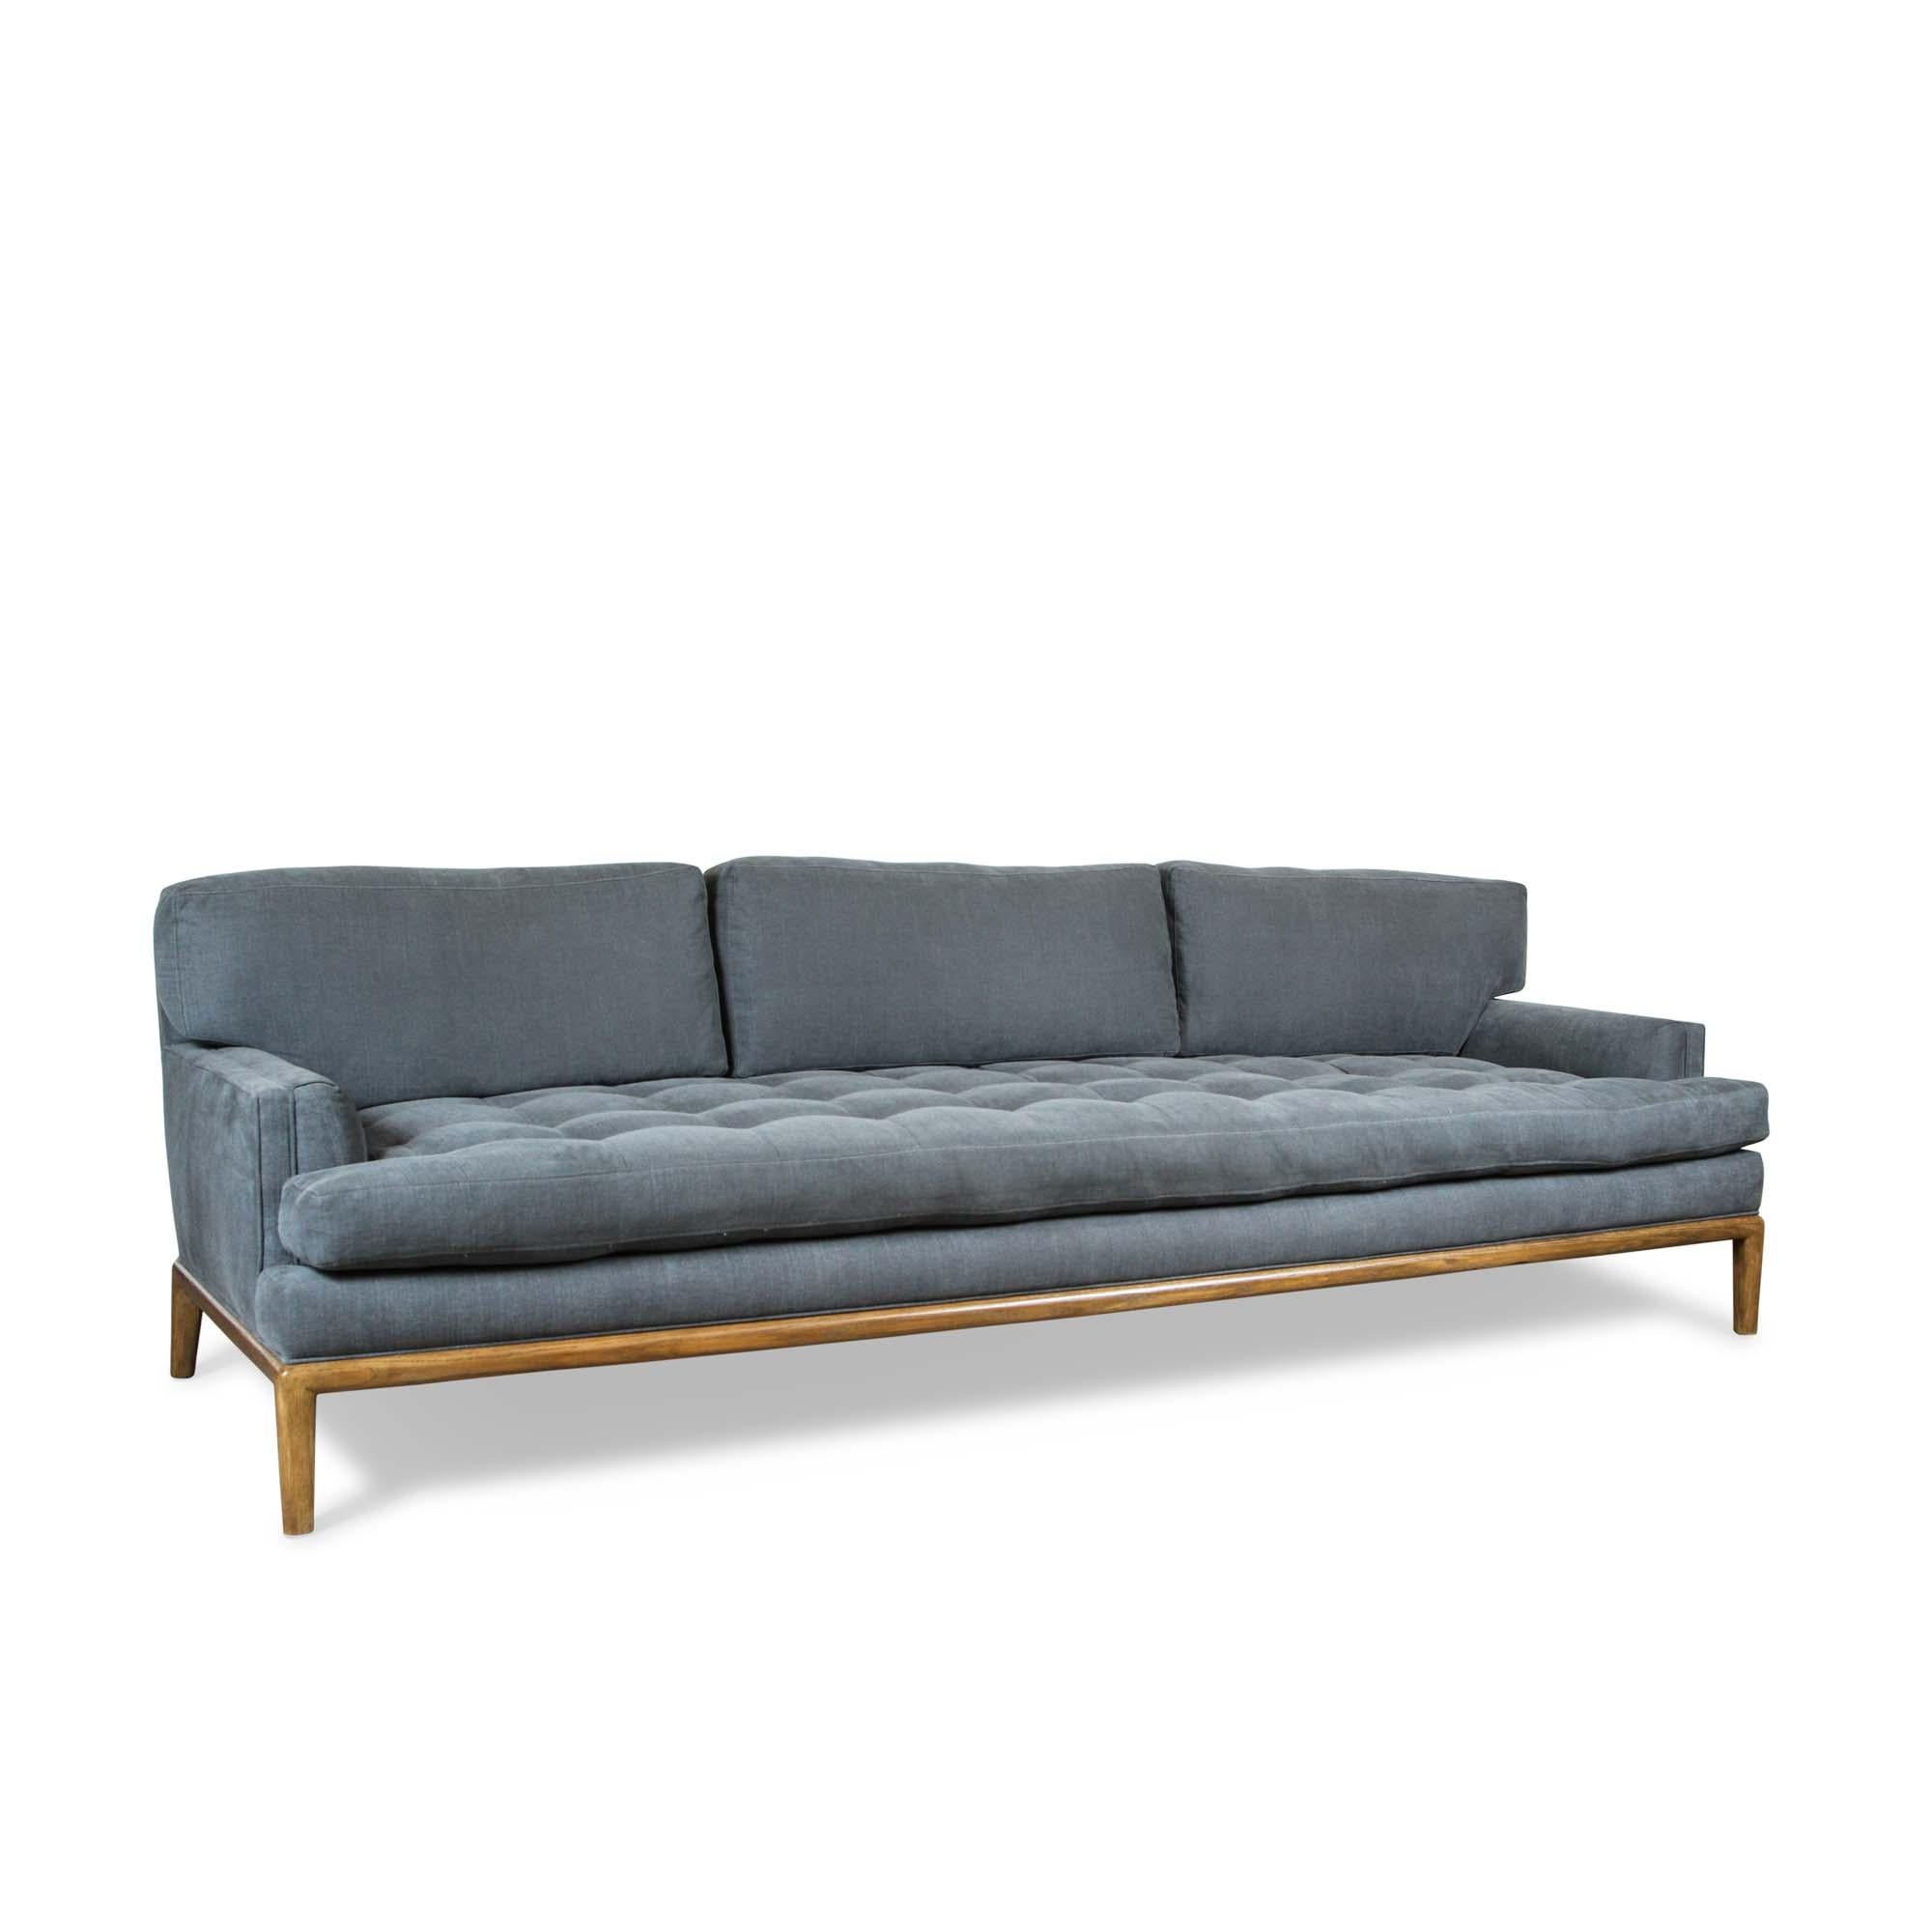 The Forster sofa is a midcentury inspired sofa with a loose tufted seat, loose back cushions, and piped details. The sofa rests atop a simple, rounded wood base.

The Lawson-Fenning Collection is designed and handmade in Los Angeles,